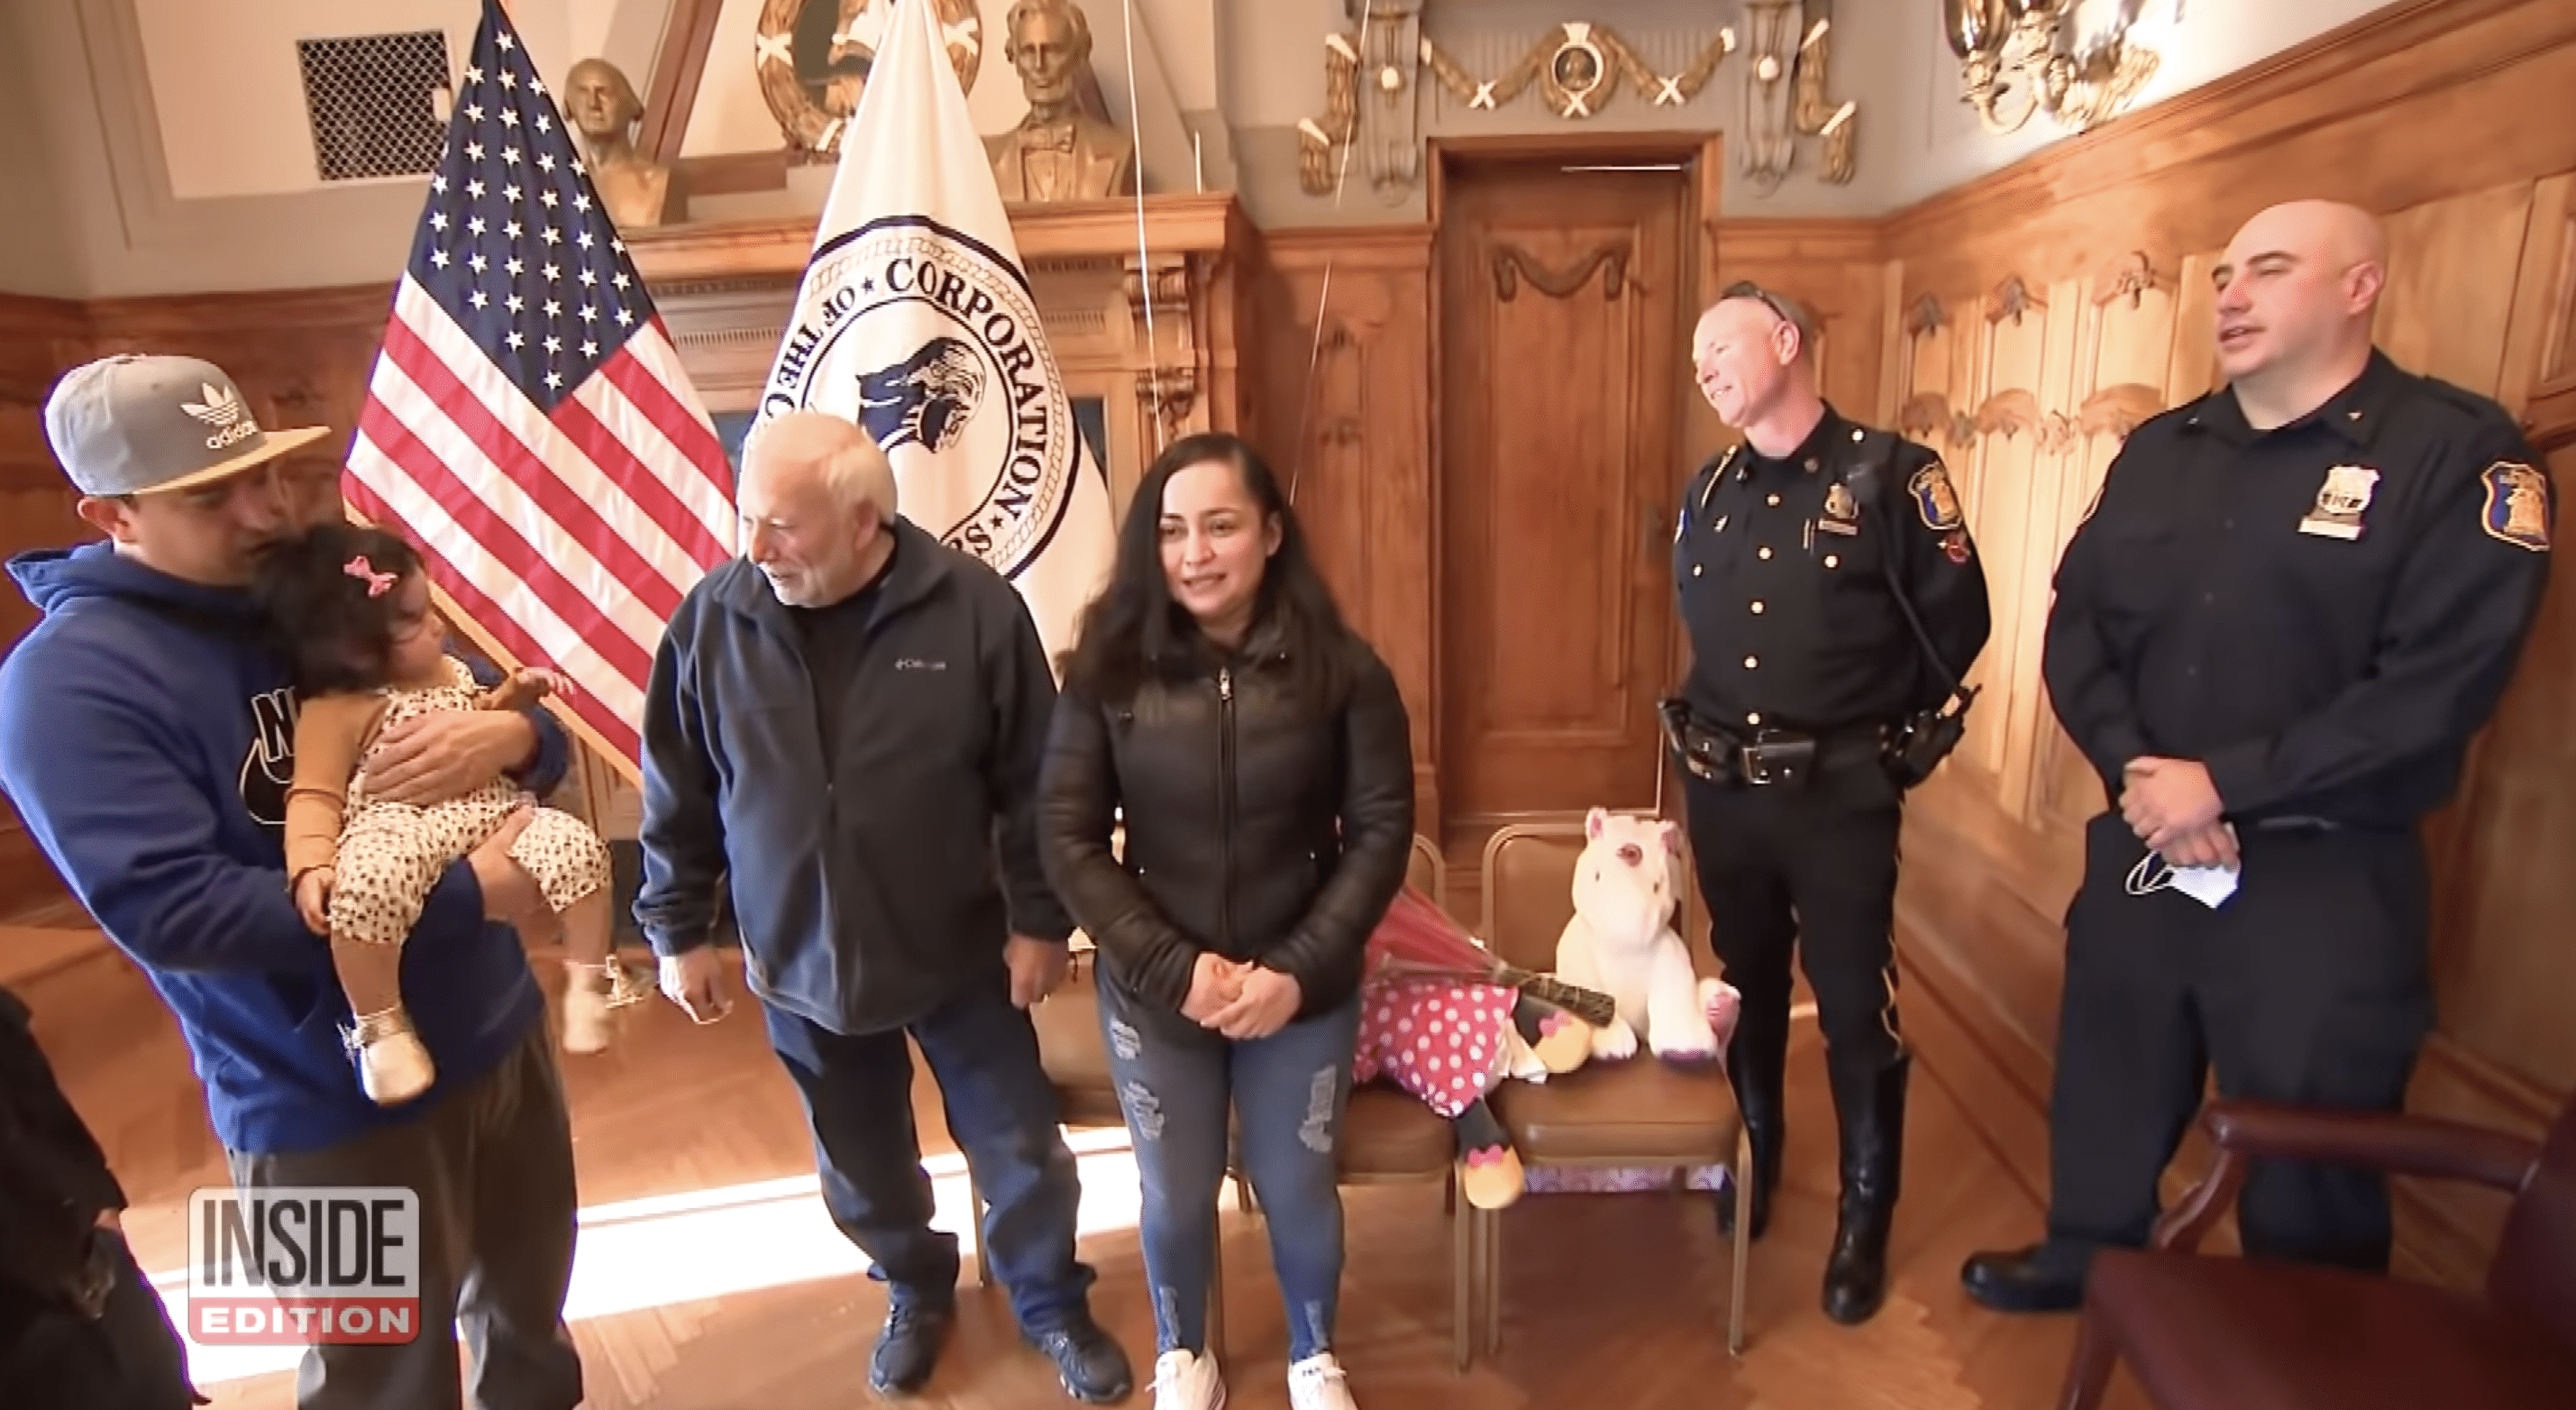 Mirna Nunez and her baby girl were reunited with the police officers who rescued them earlier this year. | Photo: YouTube.com/Inside Edition